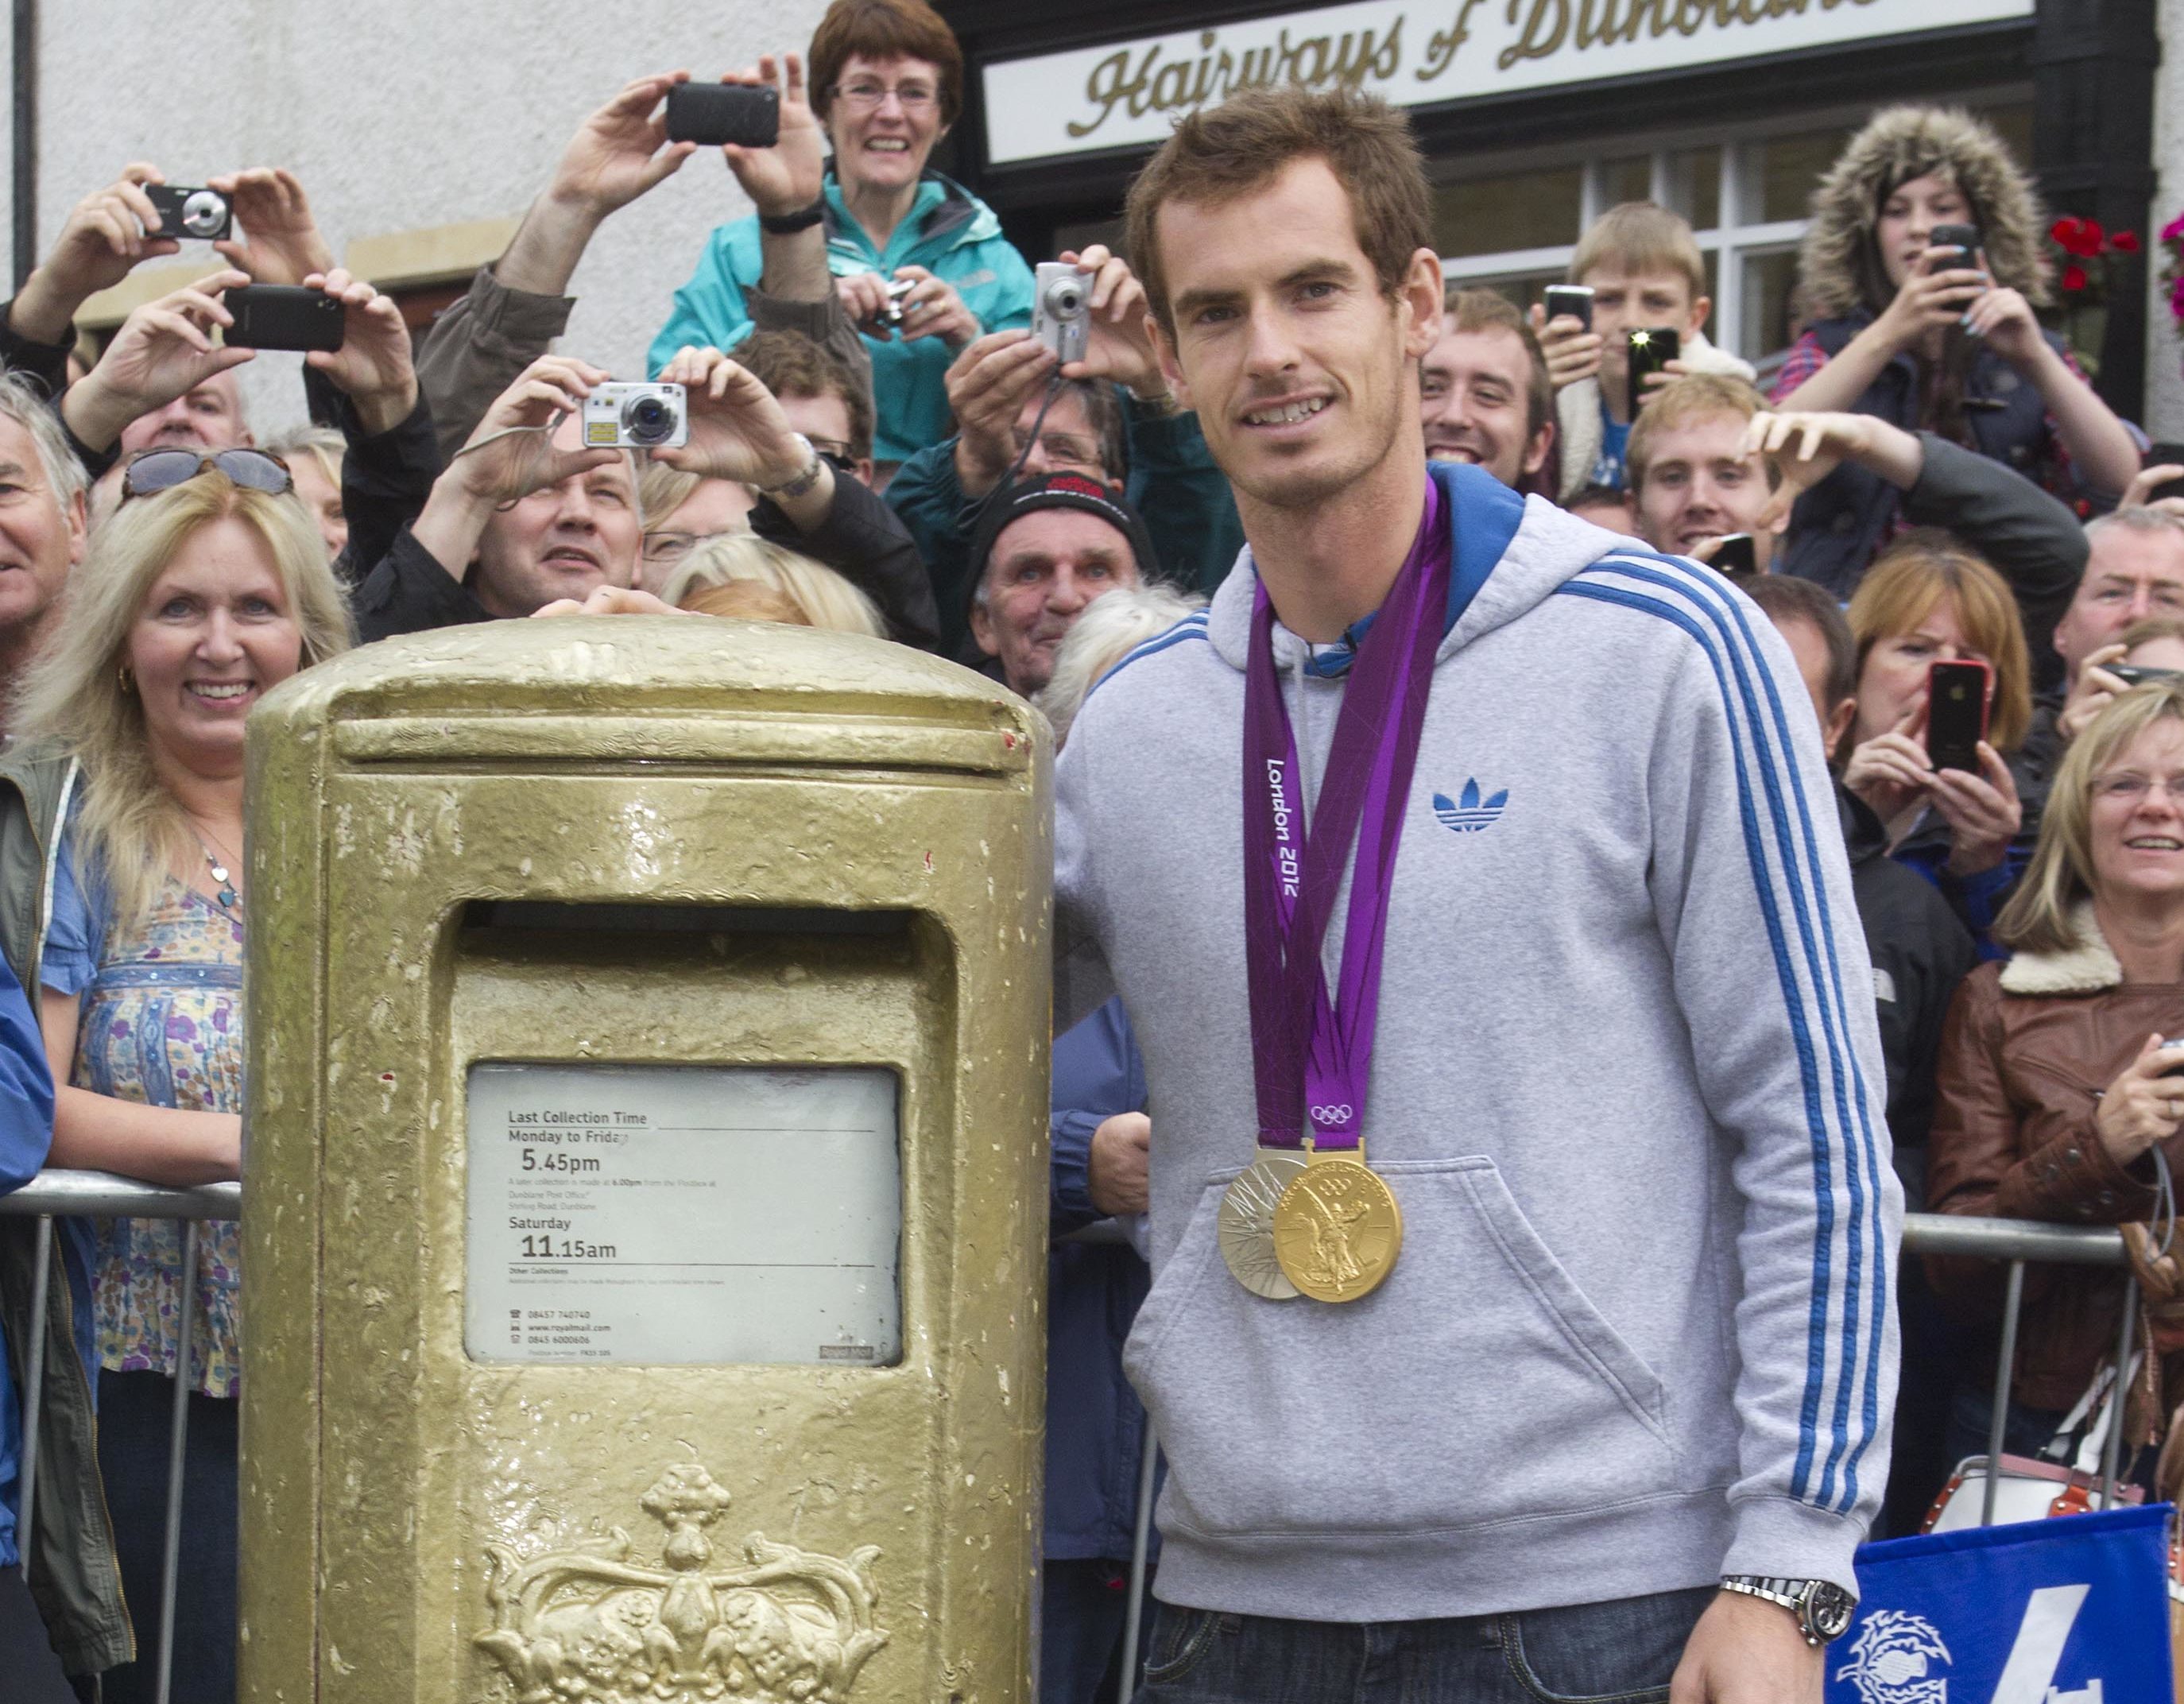 Andy murray stands next to his gold painted post box in Dunblane.